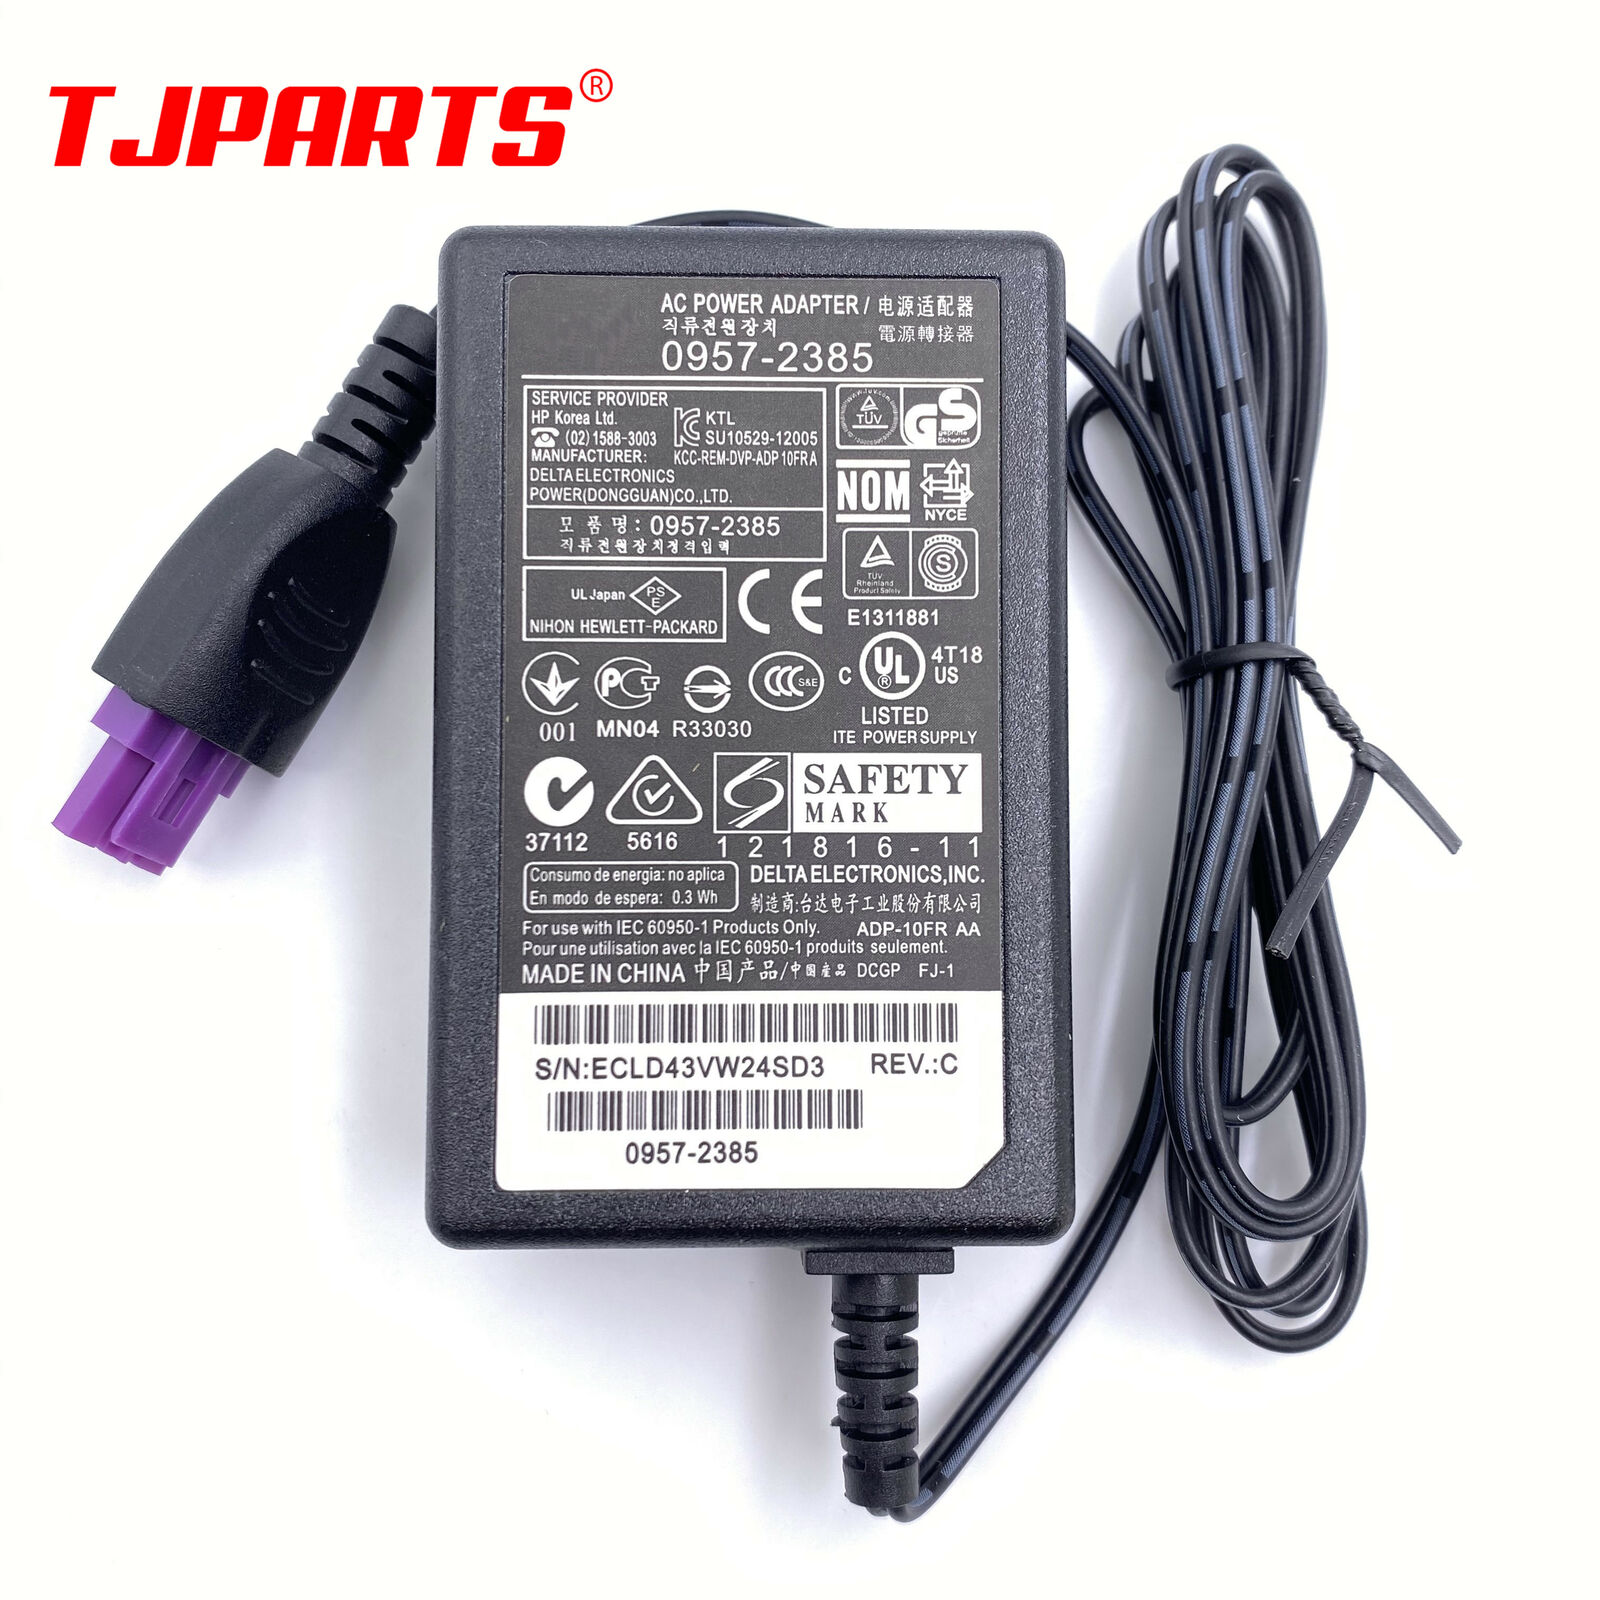 0957-2385 AC Adapter Charger Power Supply 22V 455mA for HP 1010 1012 1510 1512 Compatible Brand: For HP Item: AC Adap